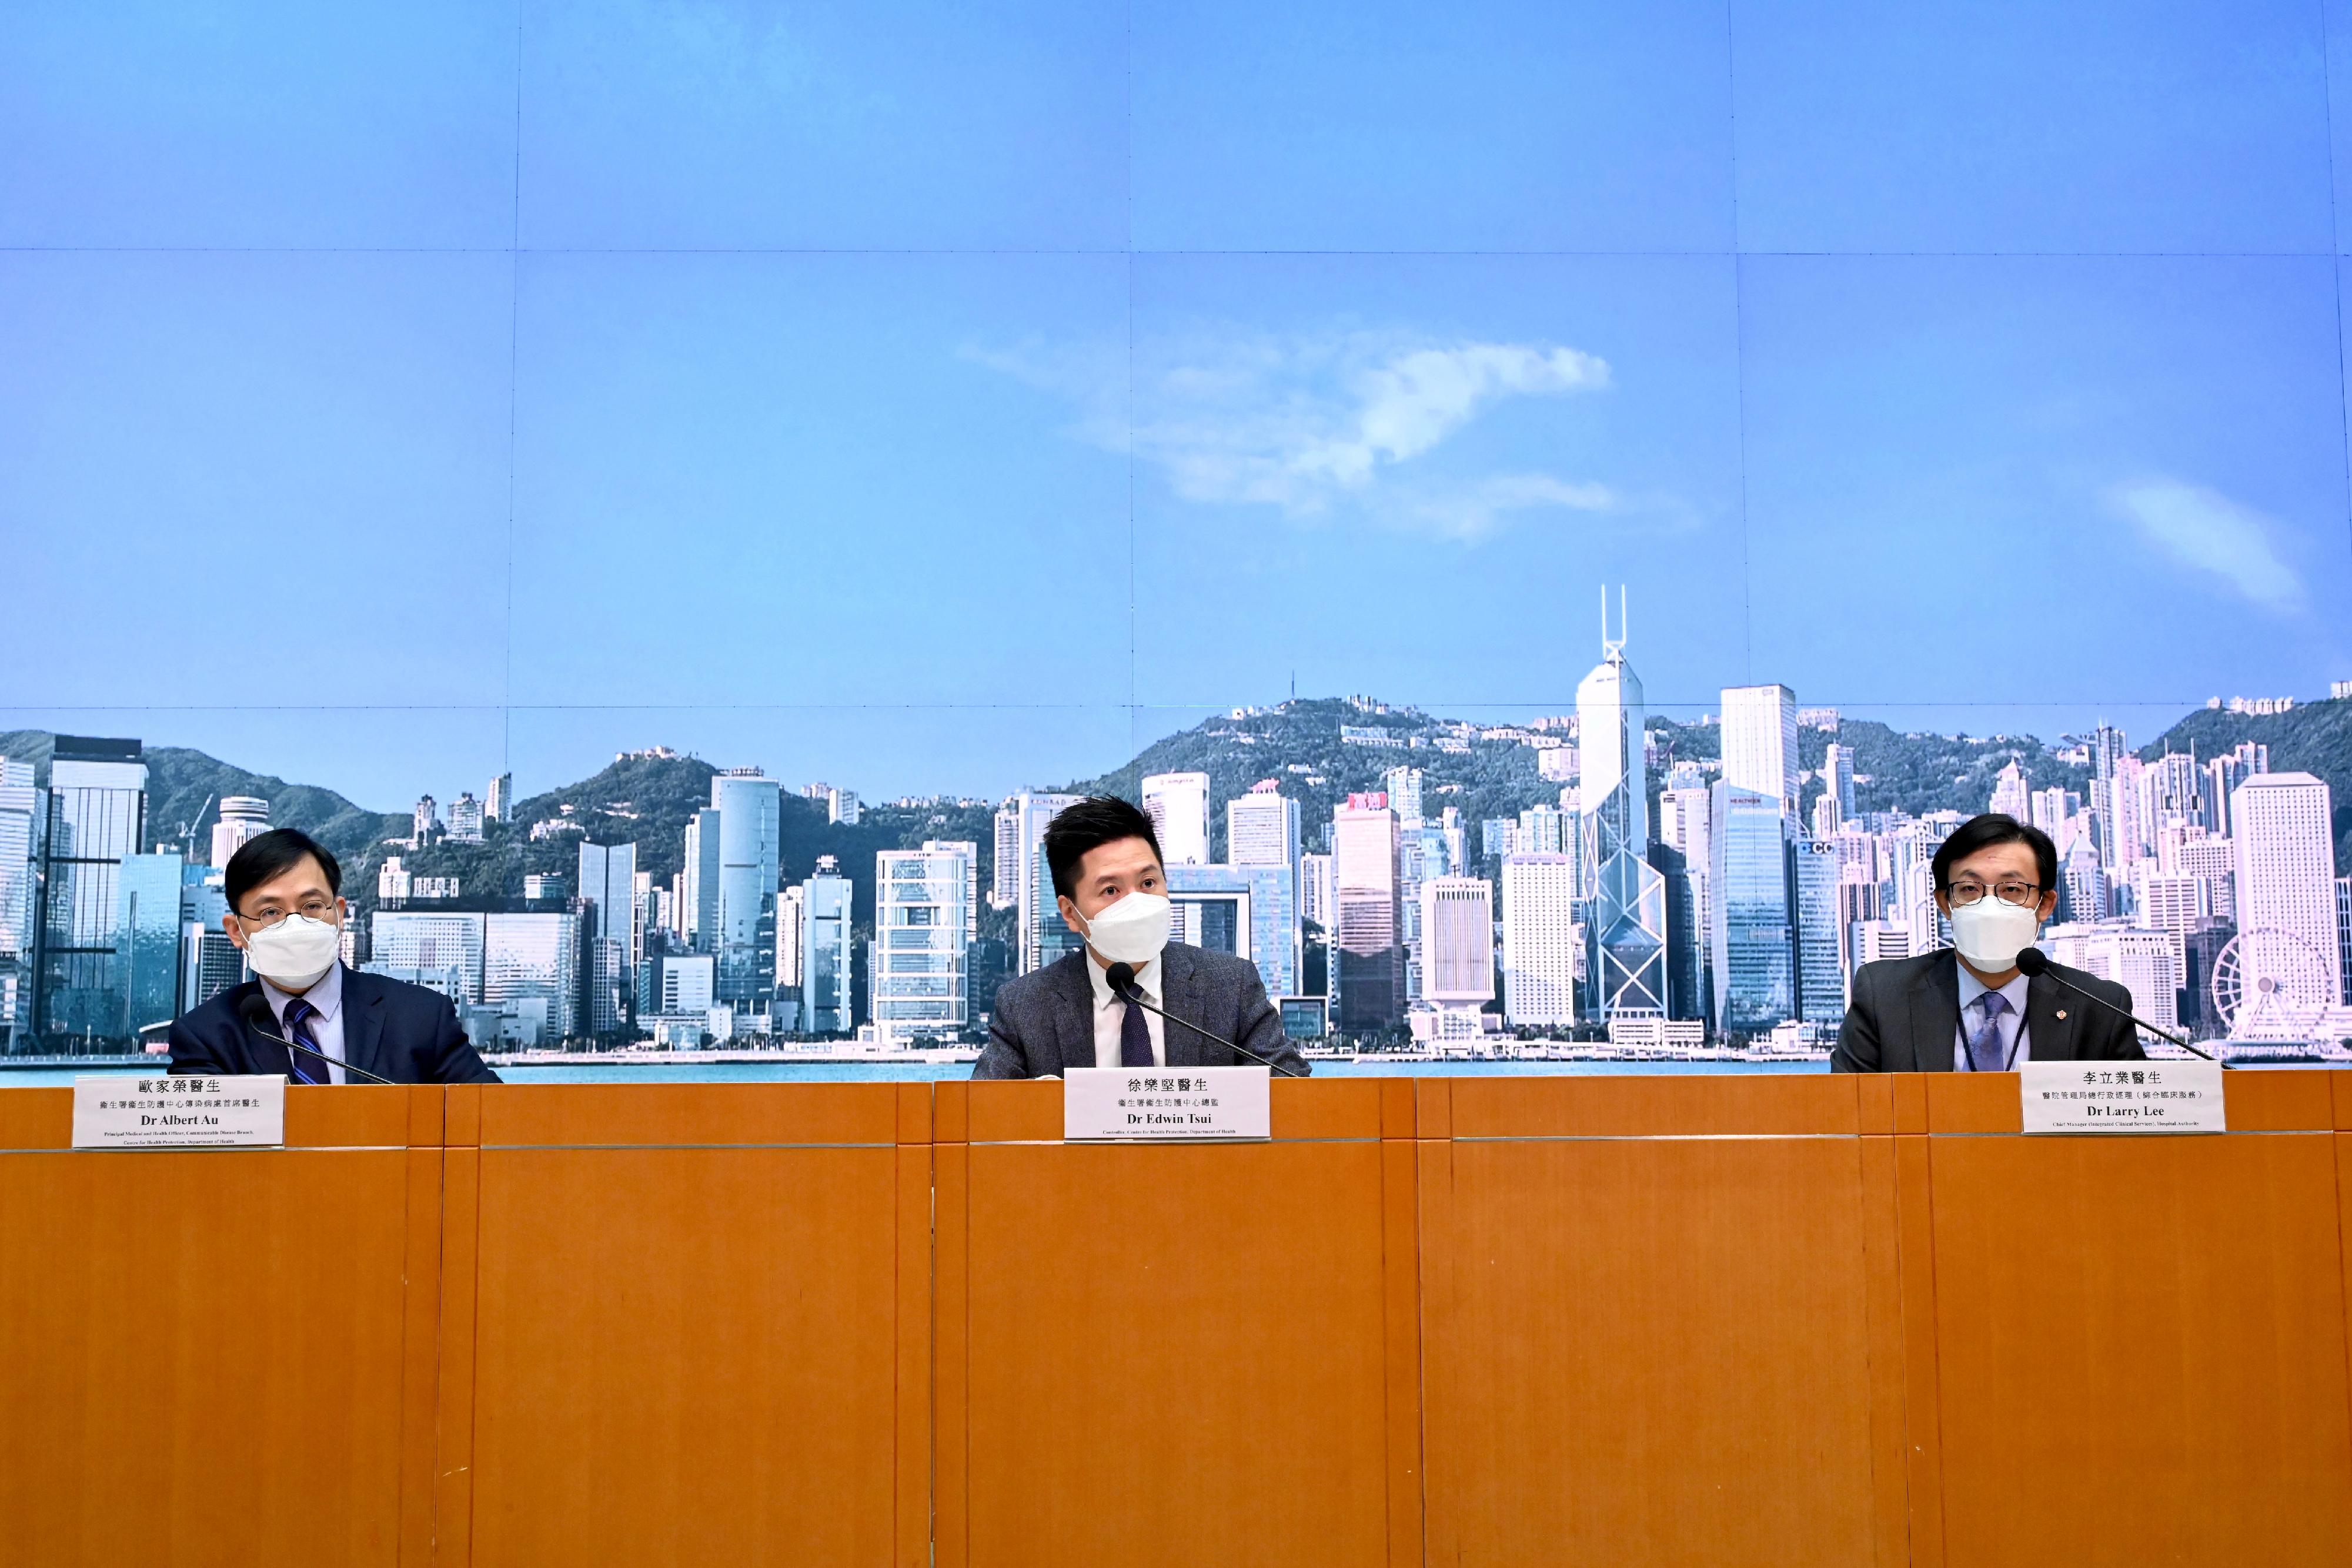 The Controller of the Centre for Health Protection (CHP) of the Department of Health (DH), Dr Edwin Tsui (centre); the Principal Medical and Health Officer of the Communicable Disease Branch of the CHP of the DH, Dr Albert Au (left); and the Chief Manager (Integrated Clinical Services) of the Hospital Authority, Dr Larry Lee (right), hold a press briefing on the latest situation of COVID-19 today (March 23).